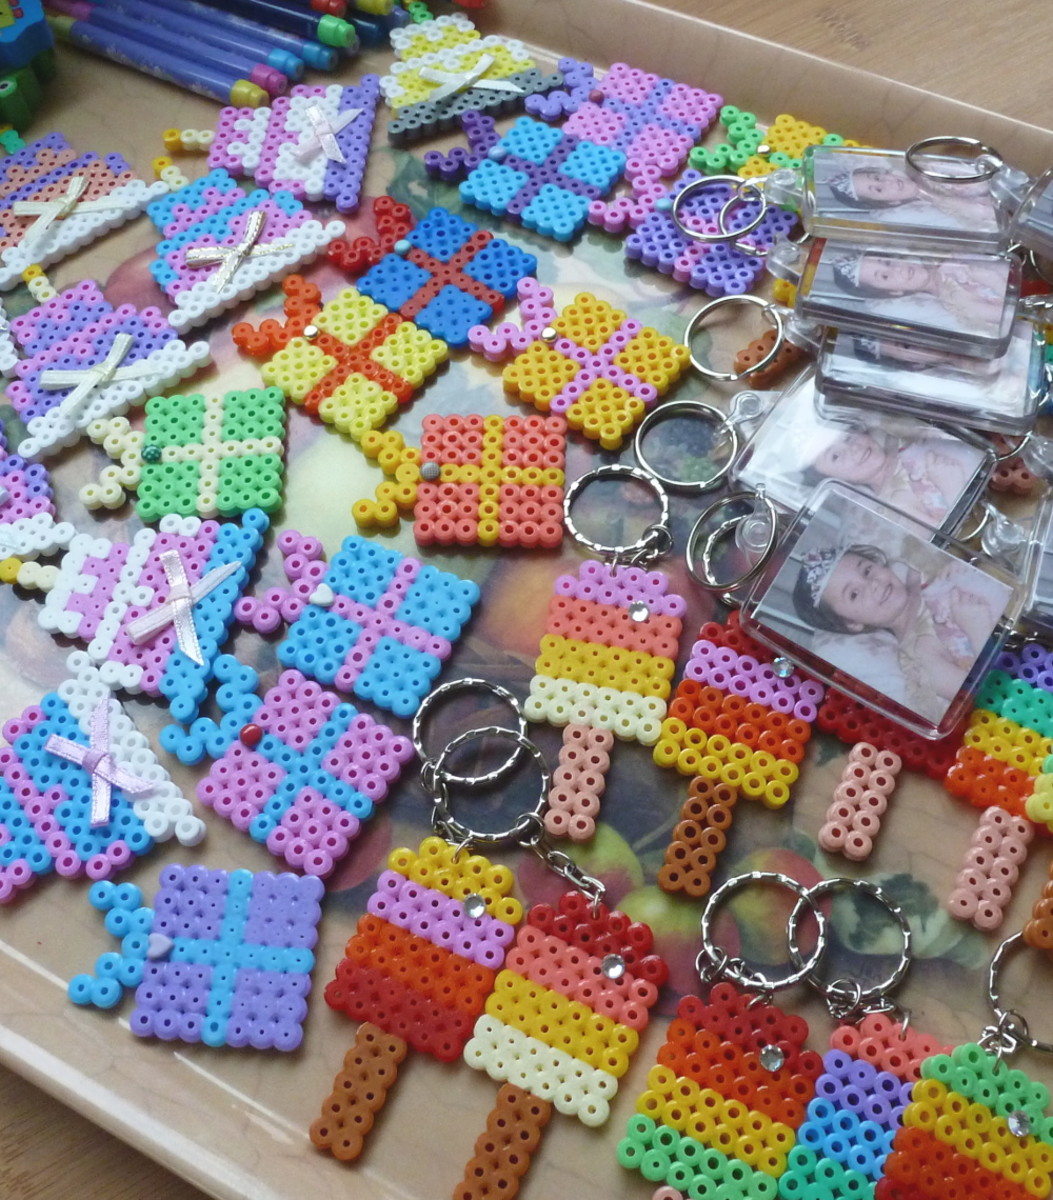 I used fused beads to make fun and cute party favors for my daughter's birthday which saved me a lot of money buying gifts.